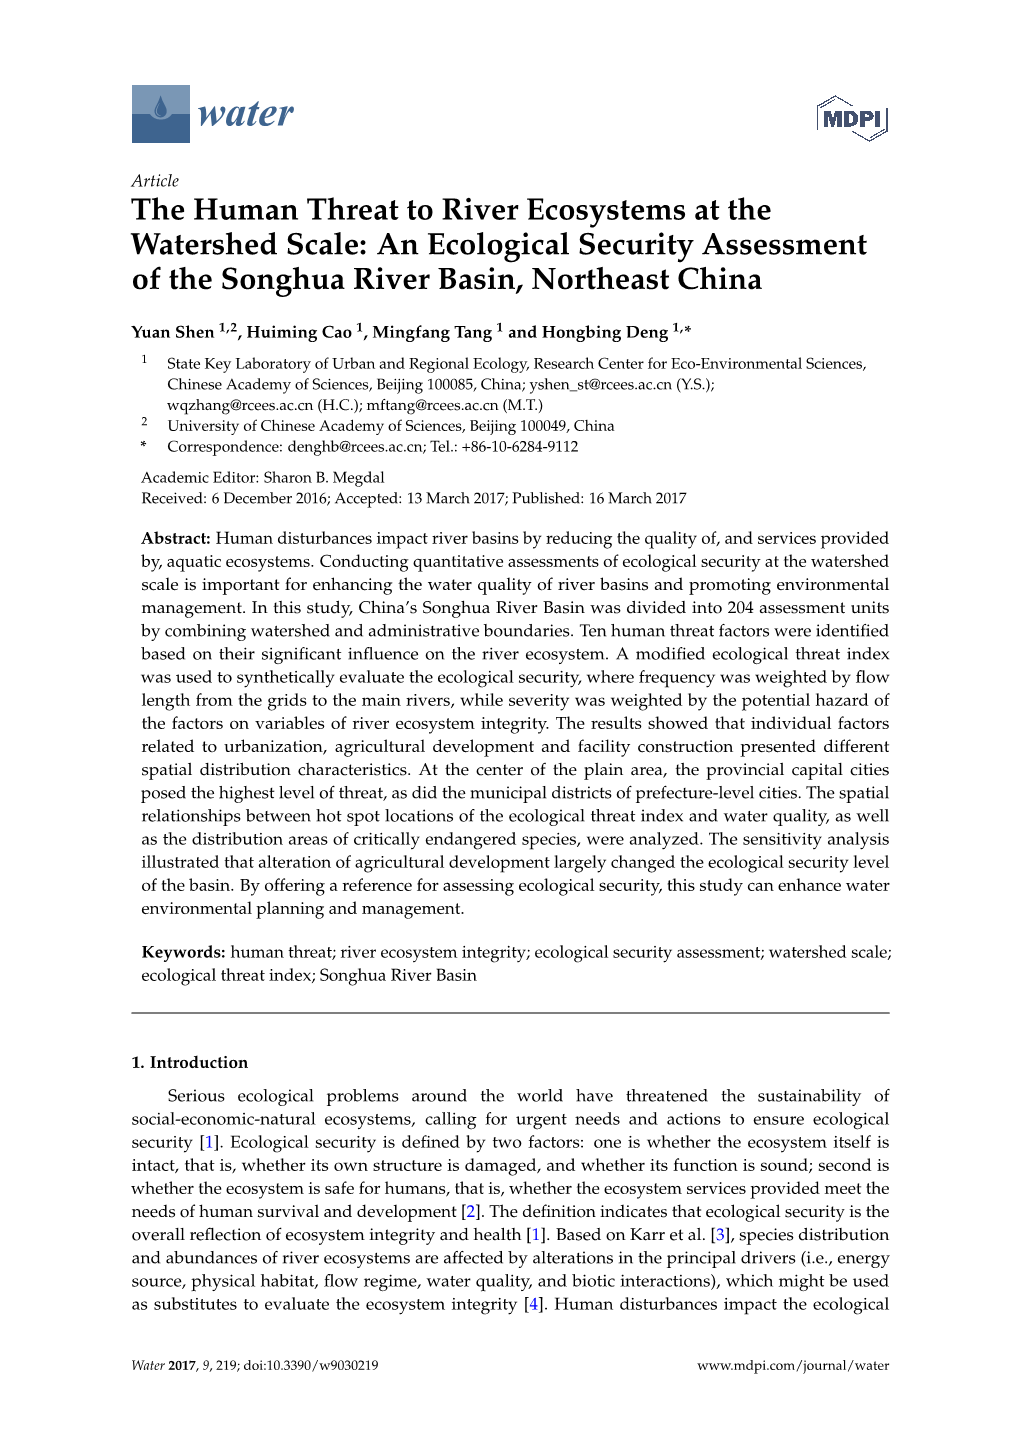 The Human Threat to River Ecosystems at the Watershed Scale: an Ecological Security Assessment of the Songhua River Basin, Northeast China